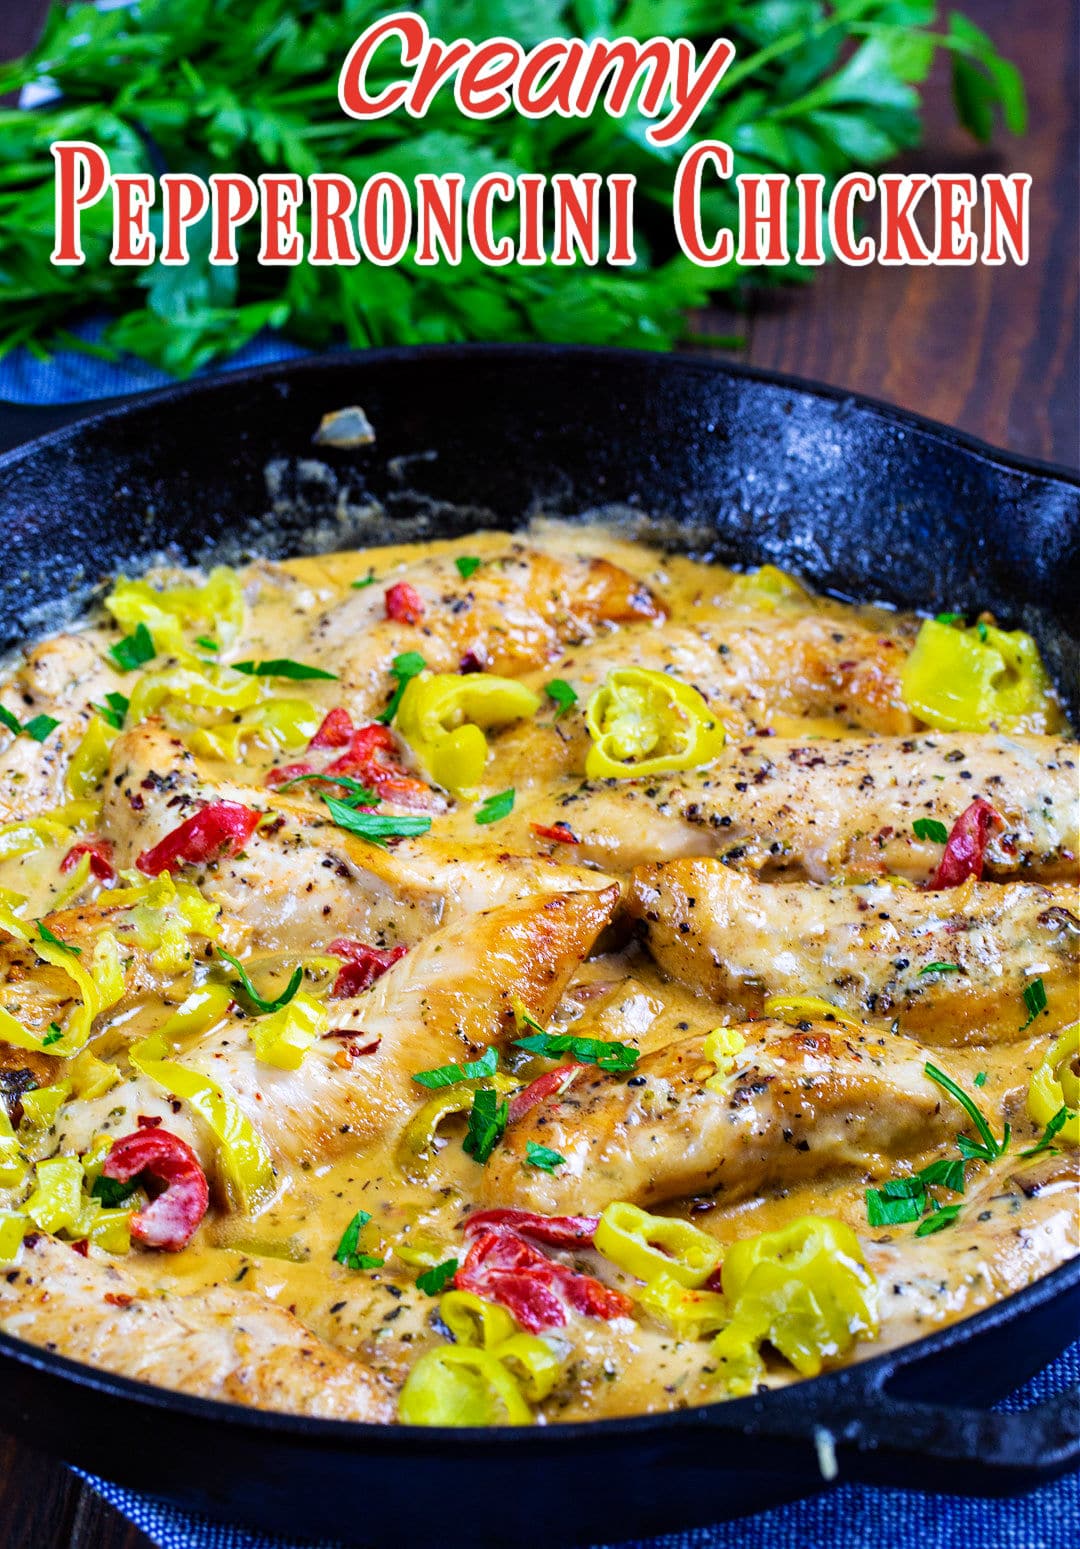 Creamy Pepperoncini Chicken in a skillet.